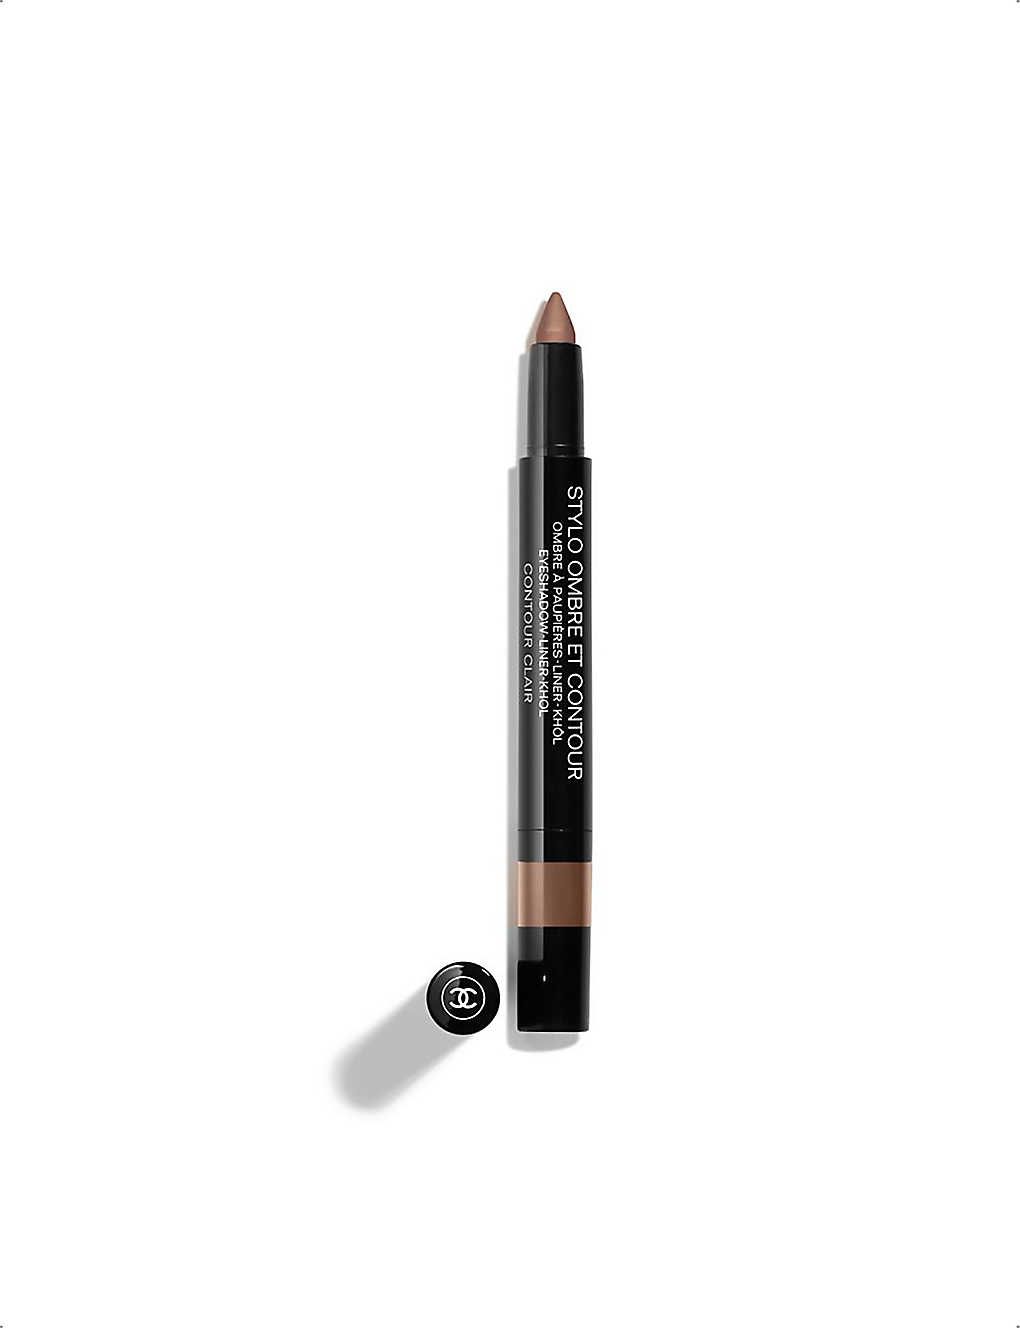 CHANEL <strong>STYLO OMBRE ET CONTOUR</strong> Eyeshadow - Liner – Kohl 0.8g | Selfridges